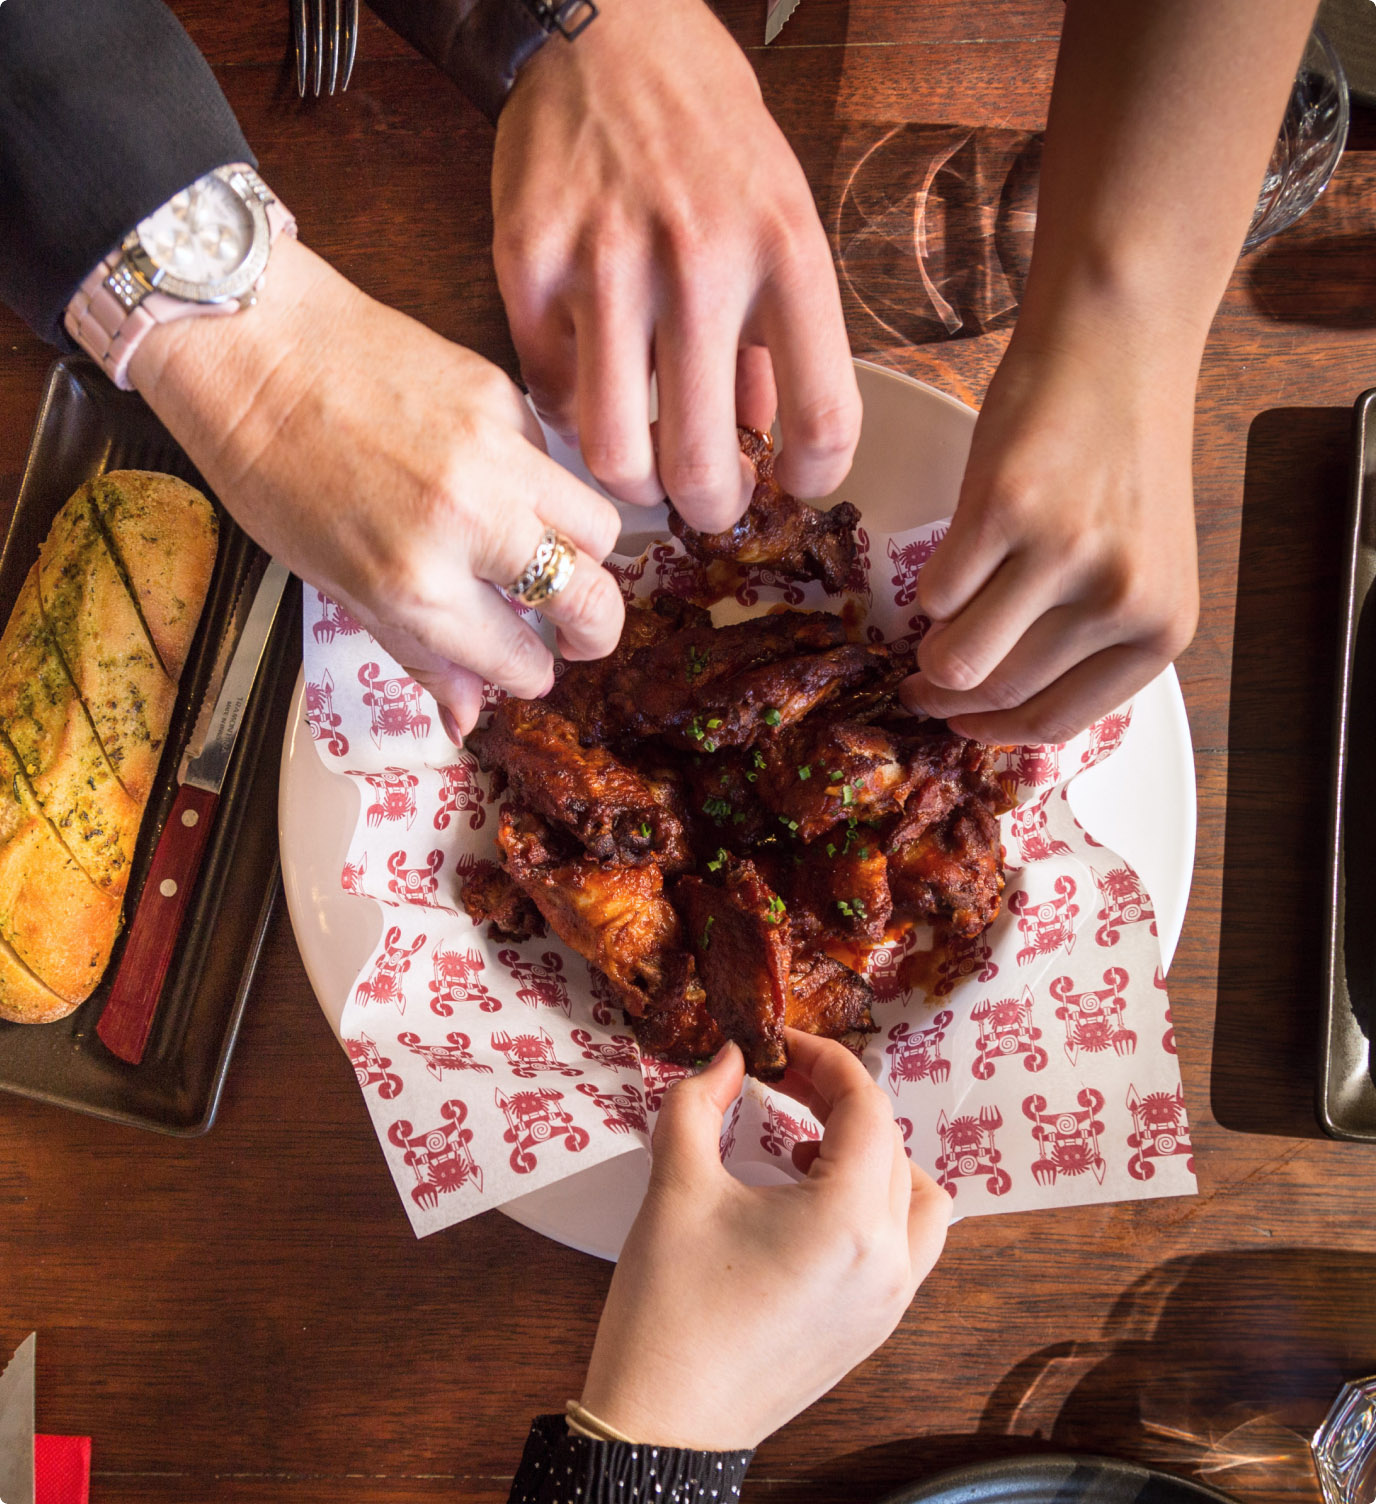 Wings for sharing, everyone gets a bit of that amazing flavour. The good stuff.